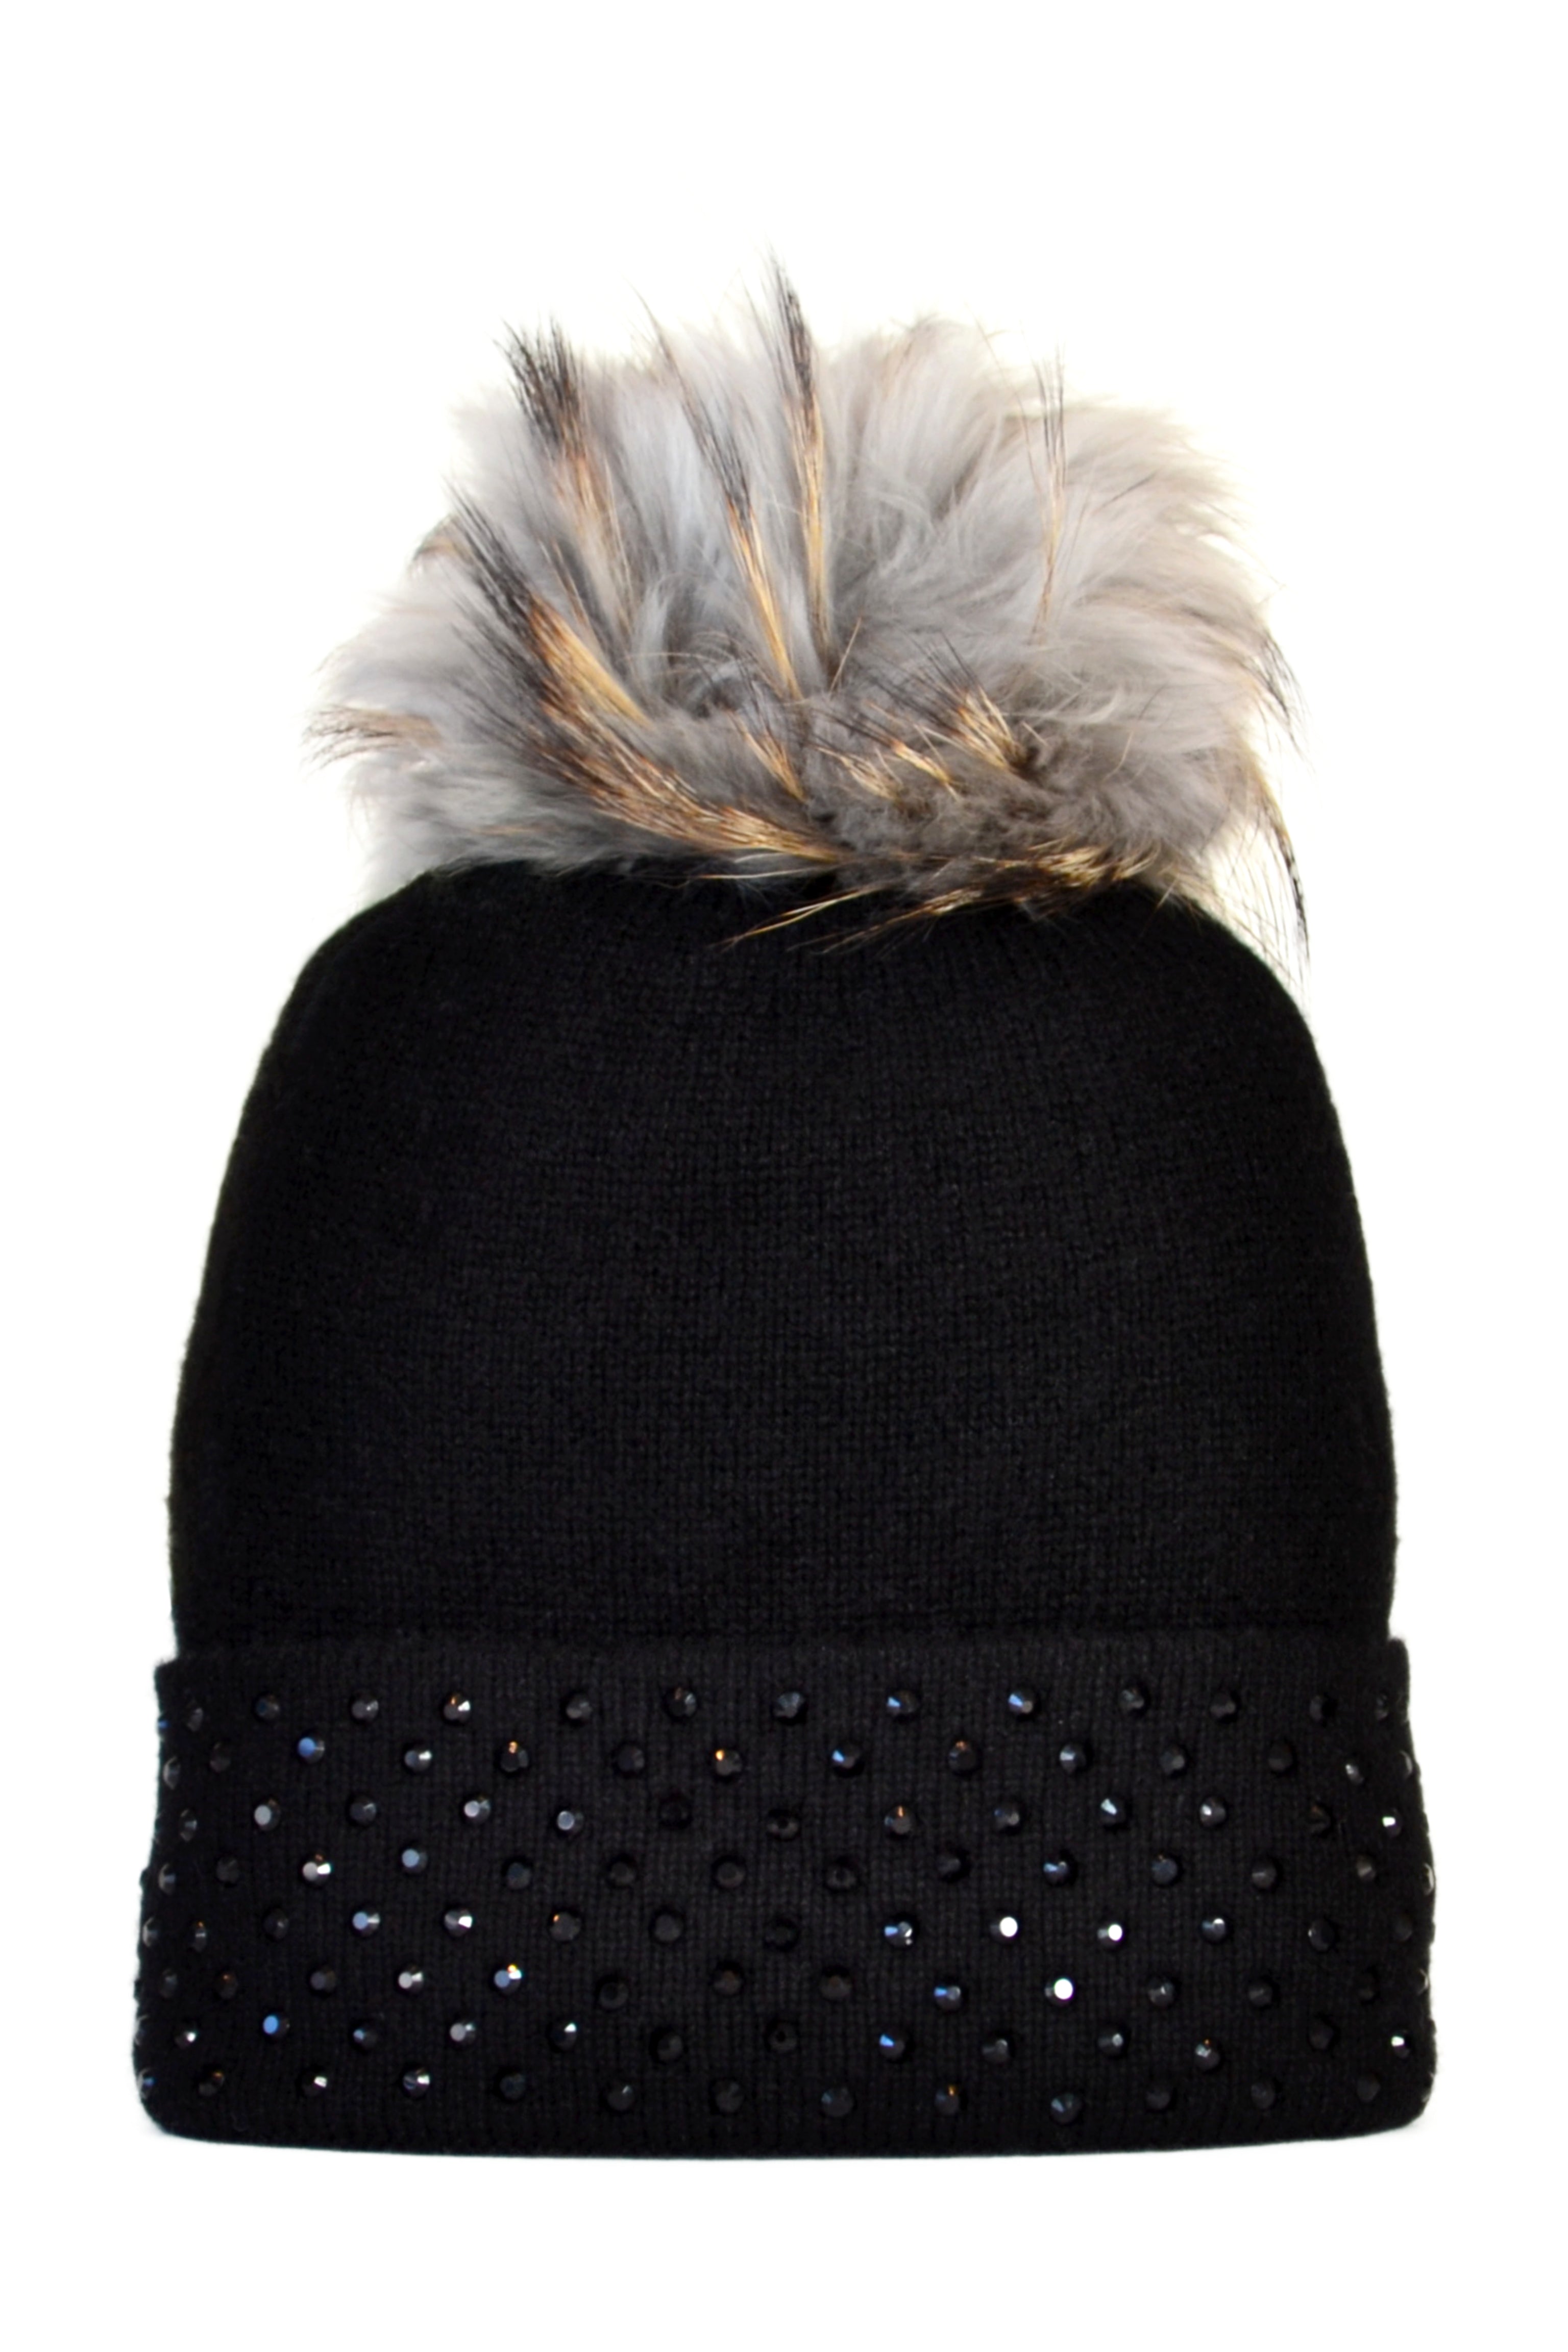 Black Cashmere Beanie with Crystals on Fold Over & Dove Gray Pom